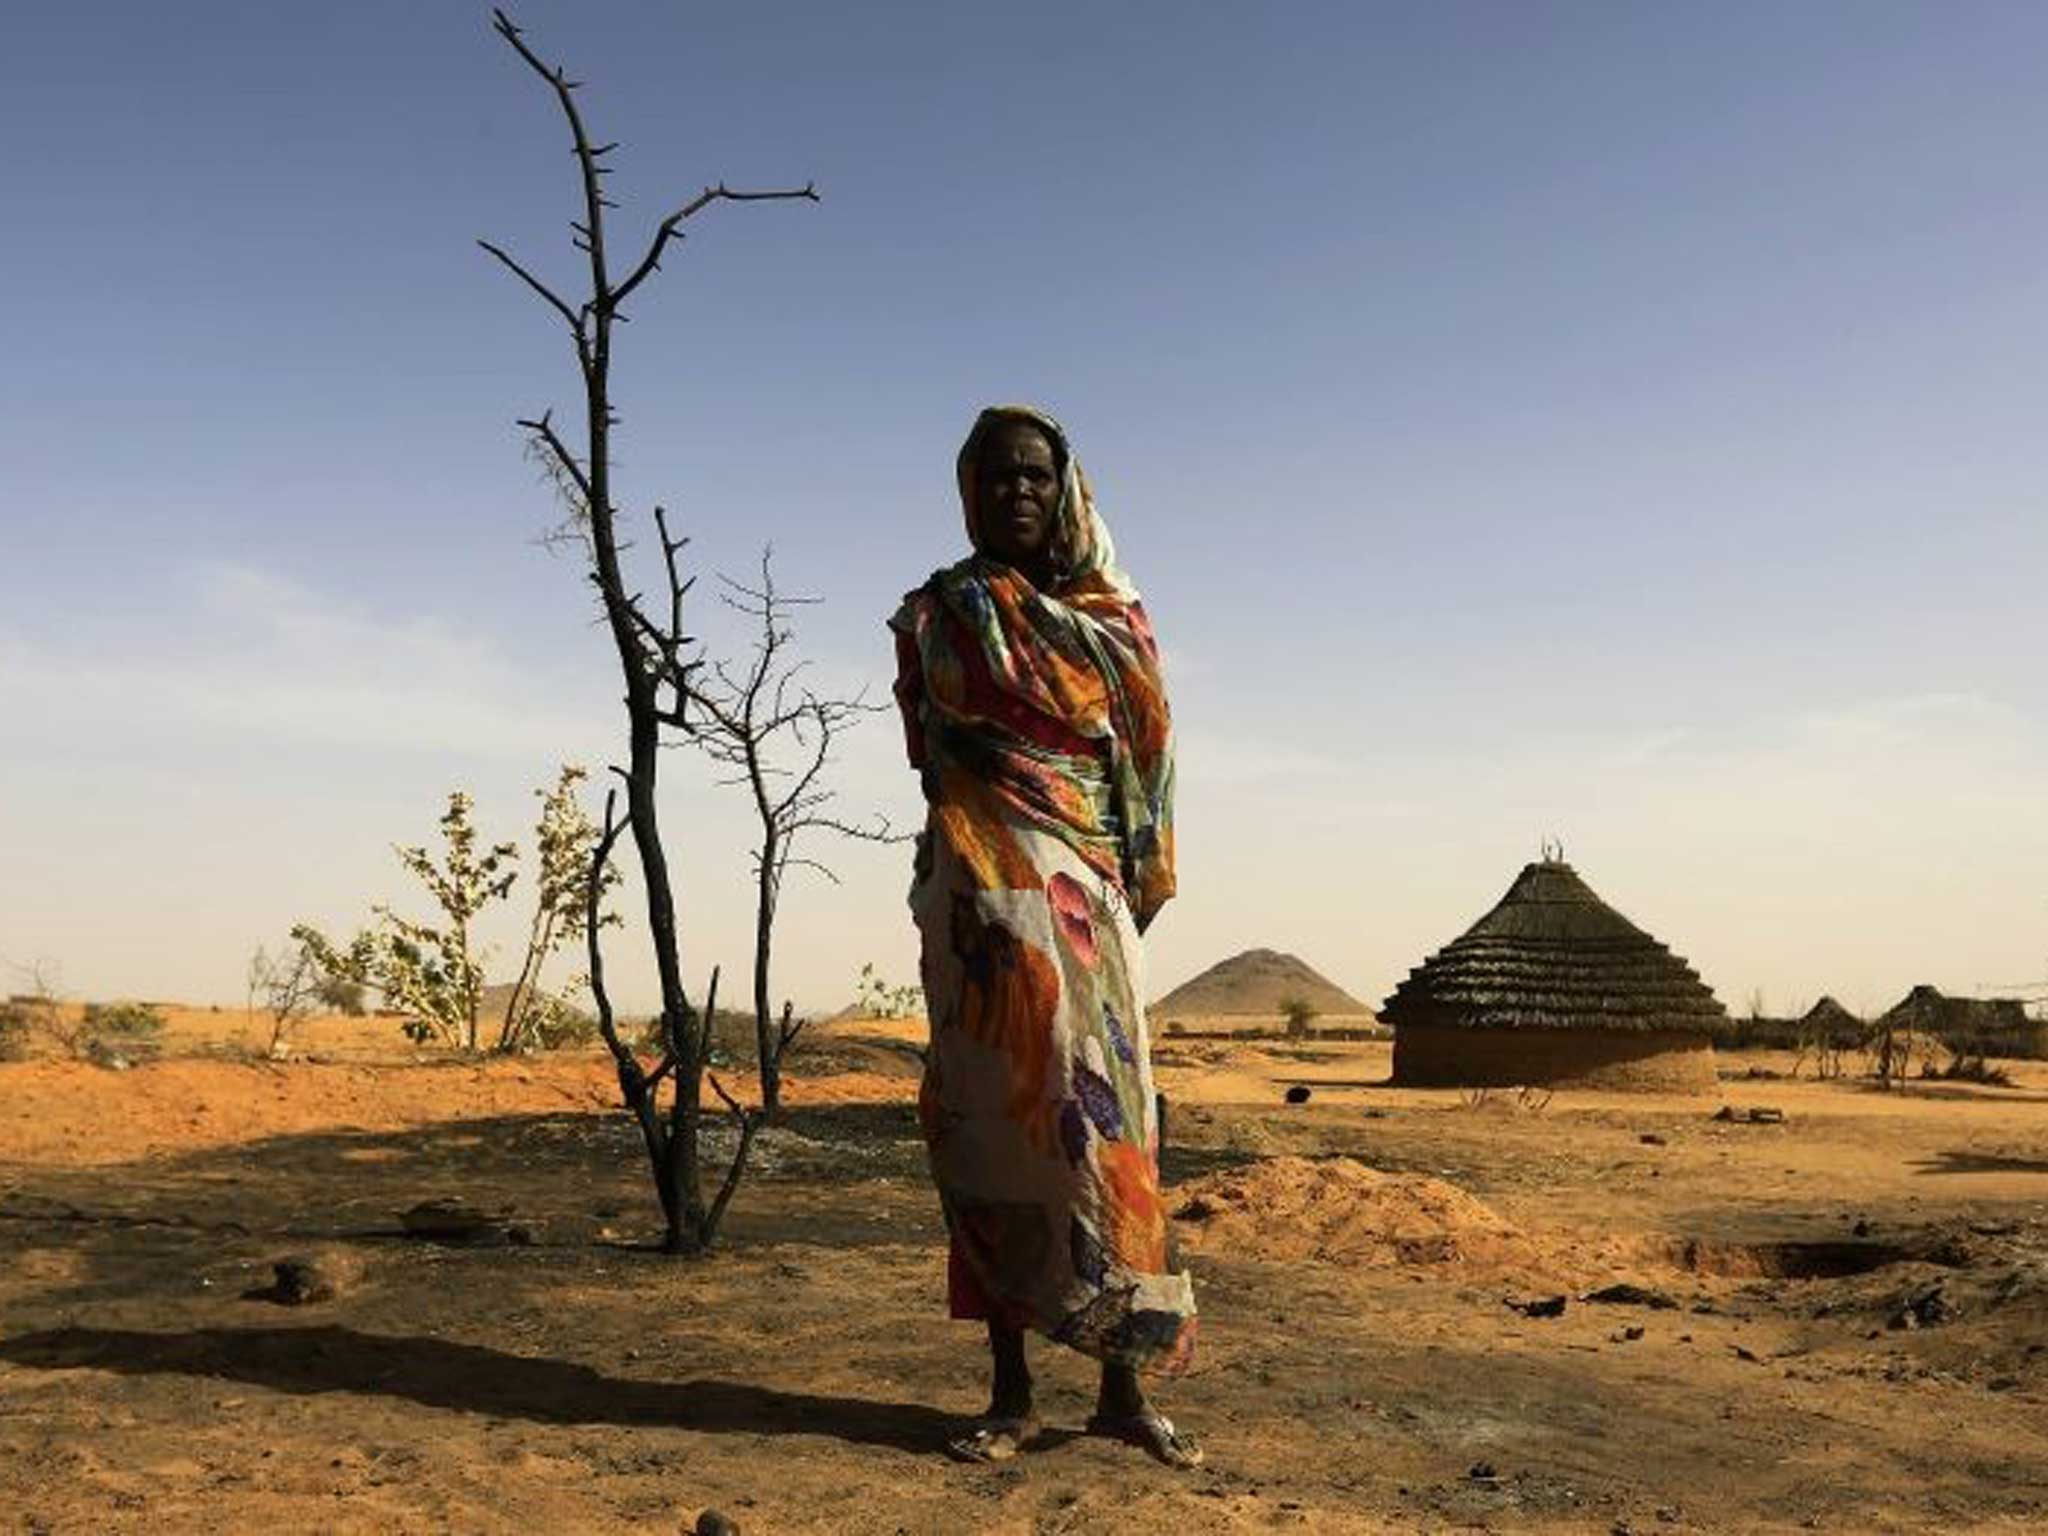 Sudan shame: A woman at what was once her home, burned down by Sudanese rebels